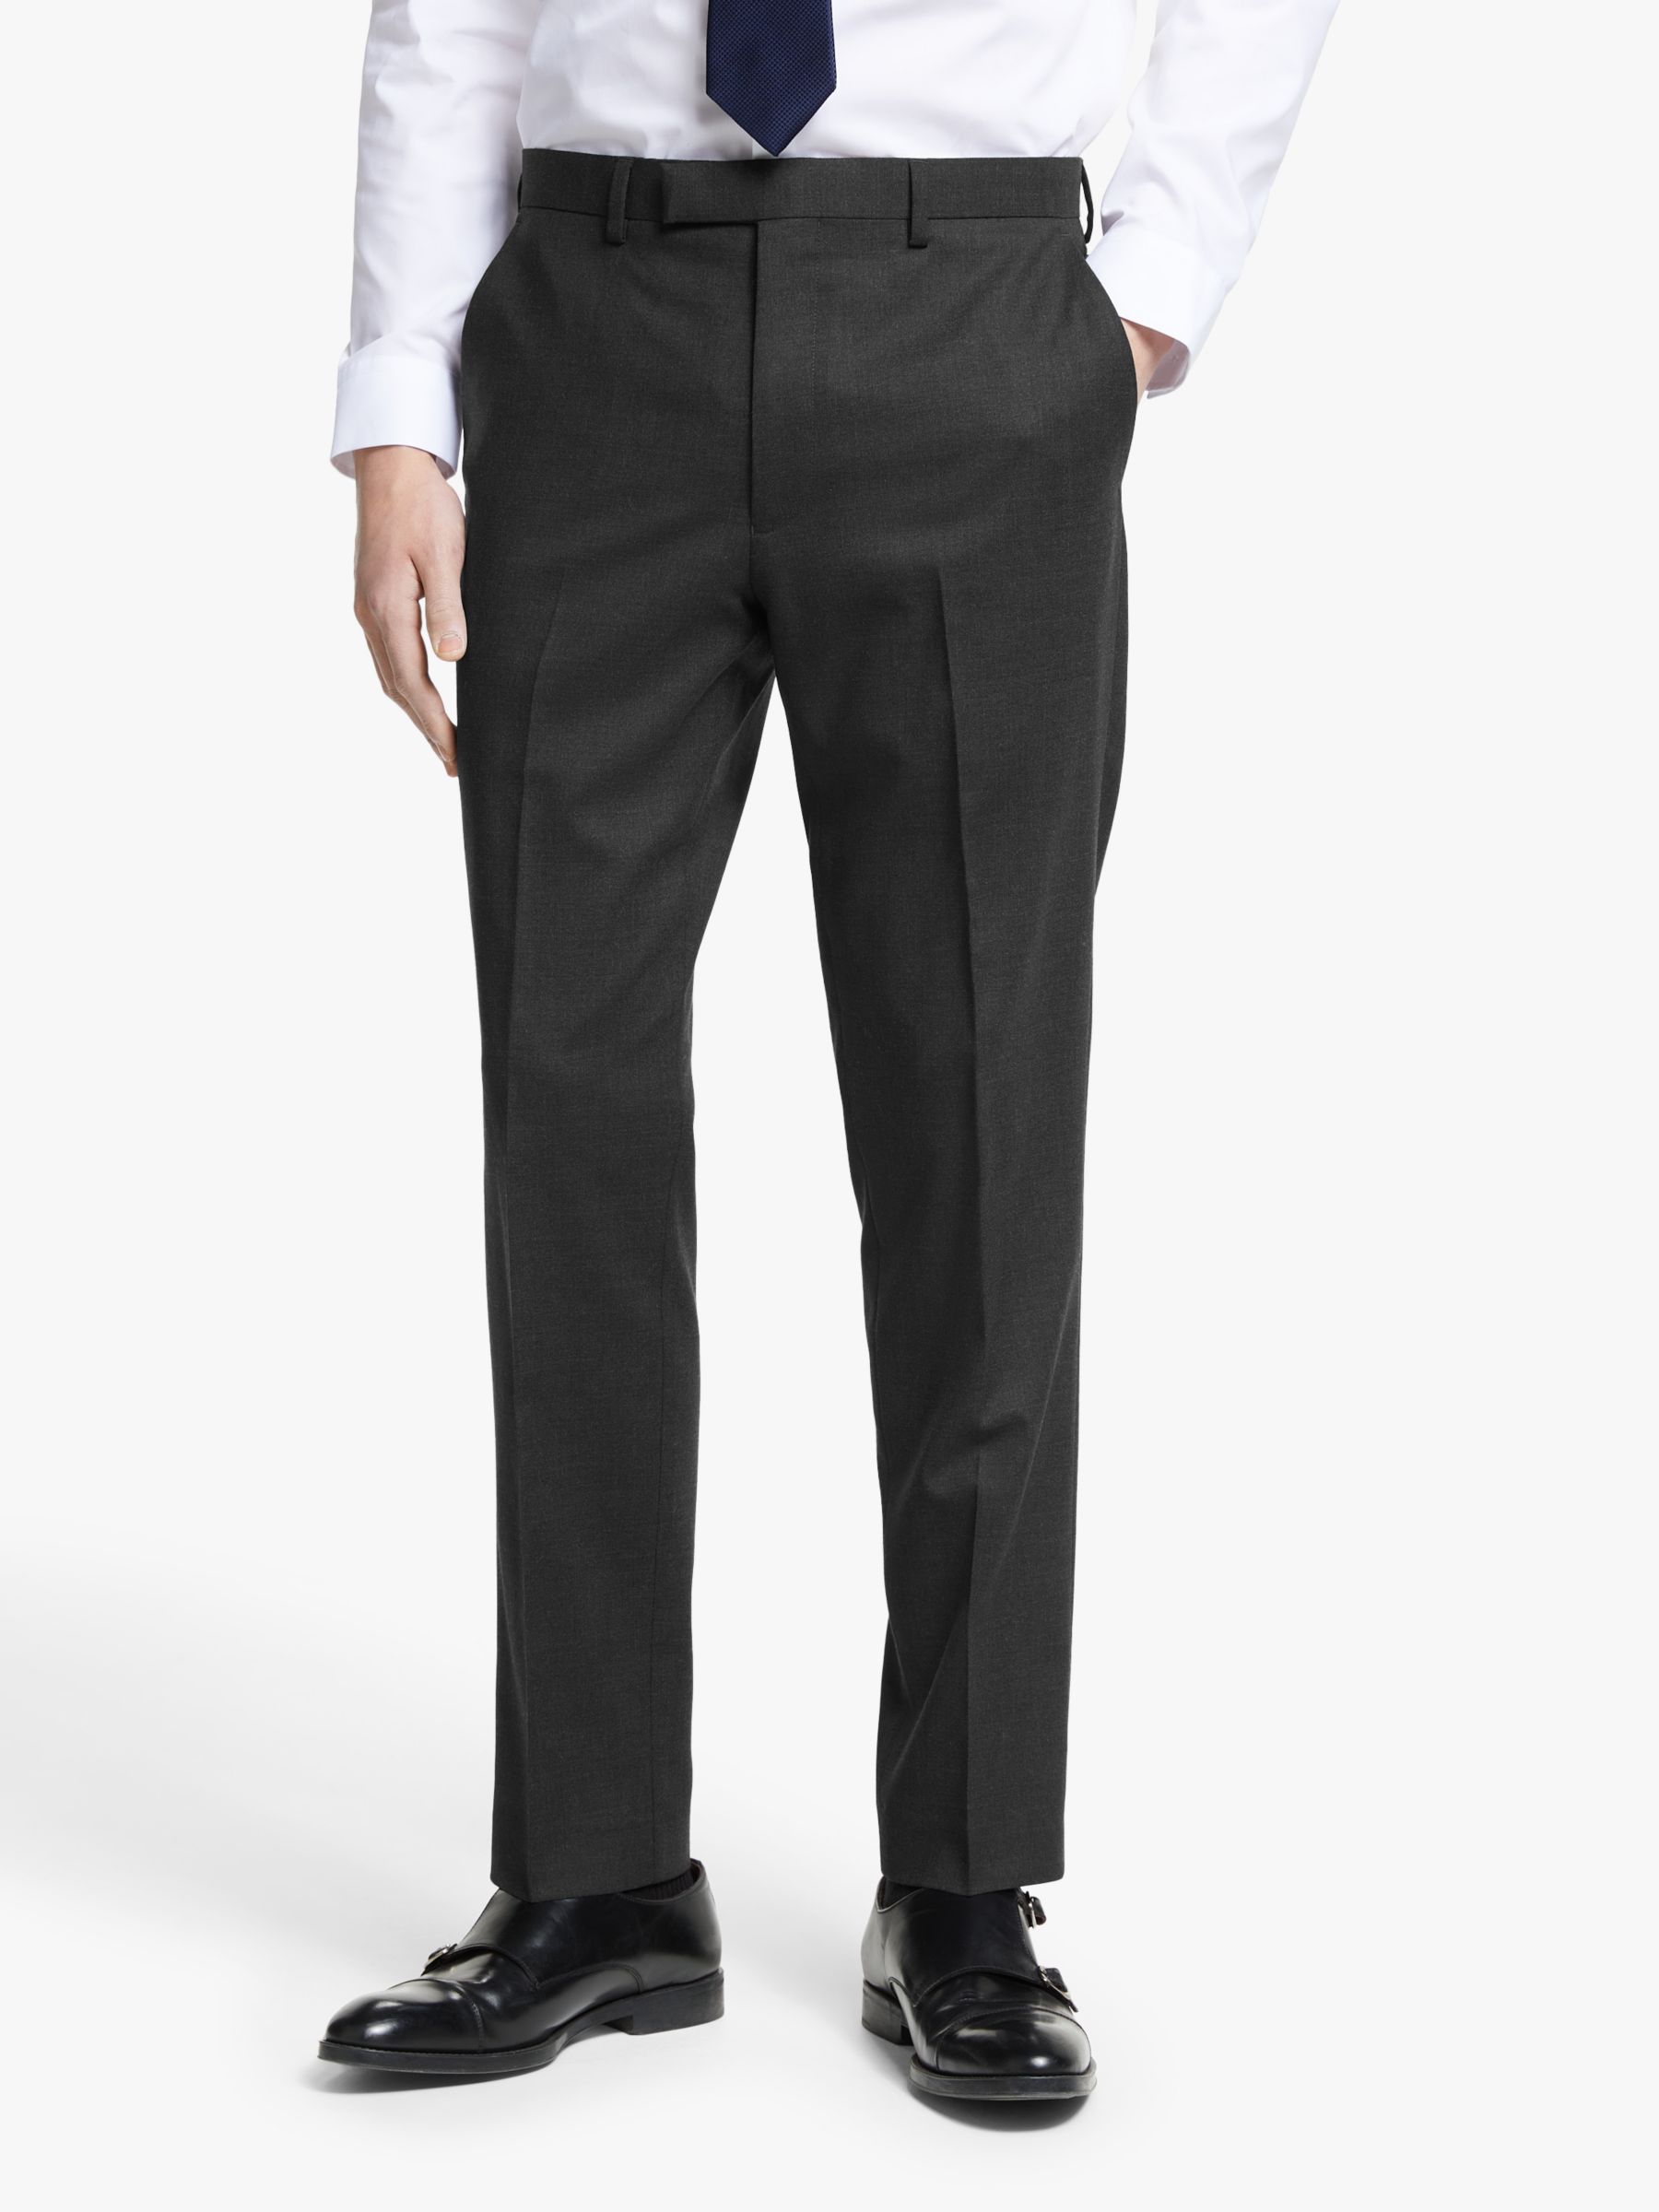 Kin Bengaline Wool Slim Fit Suit Trousers, Charcoal